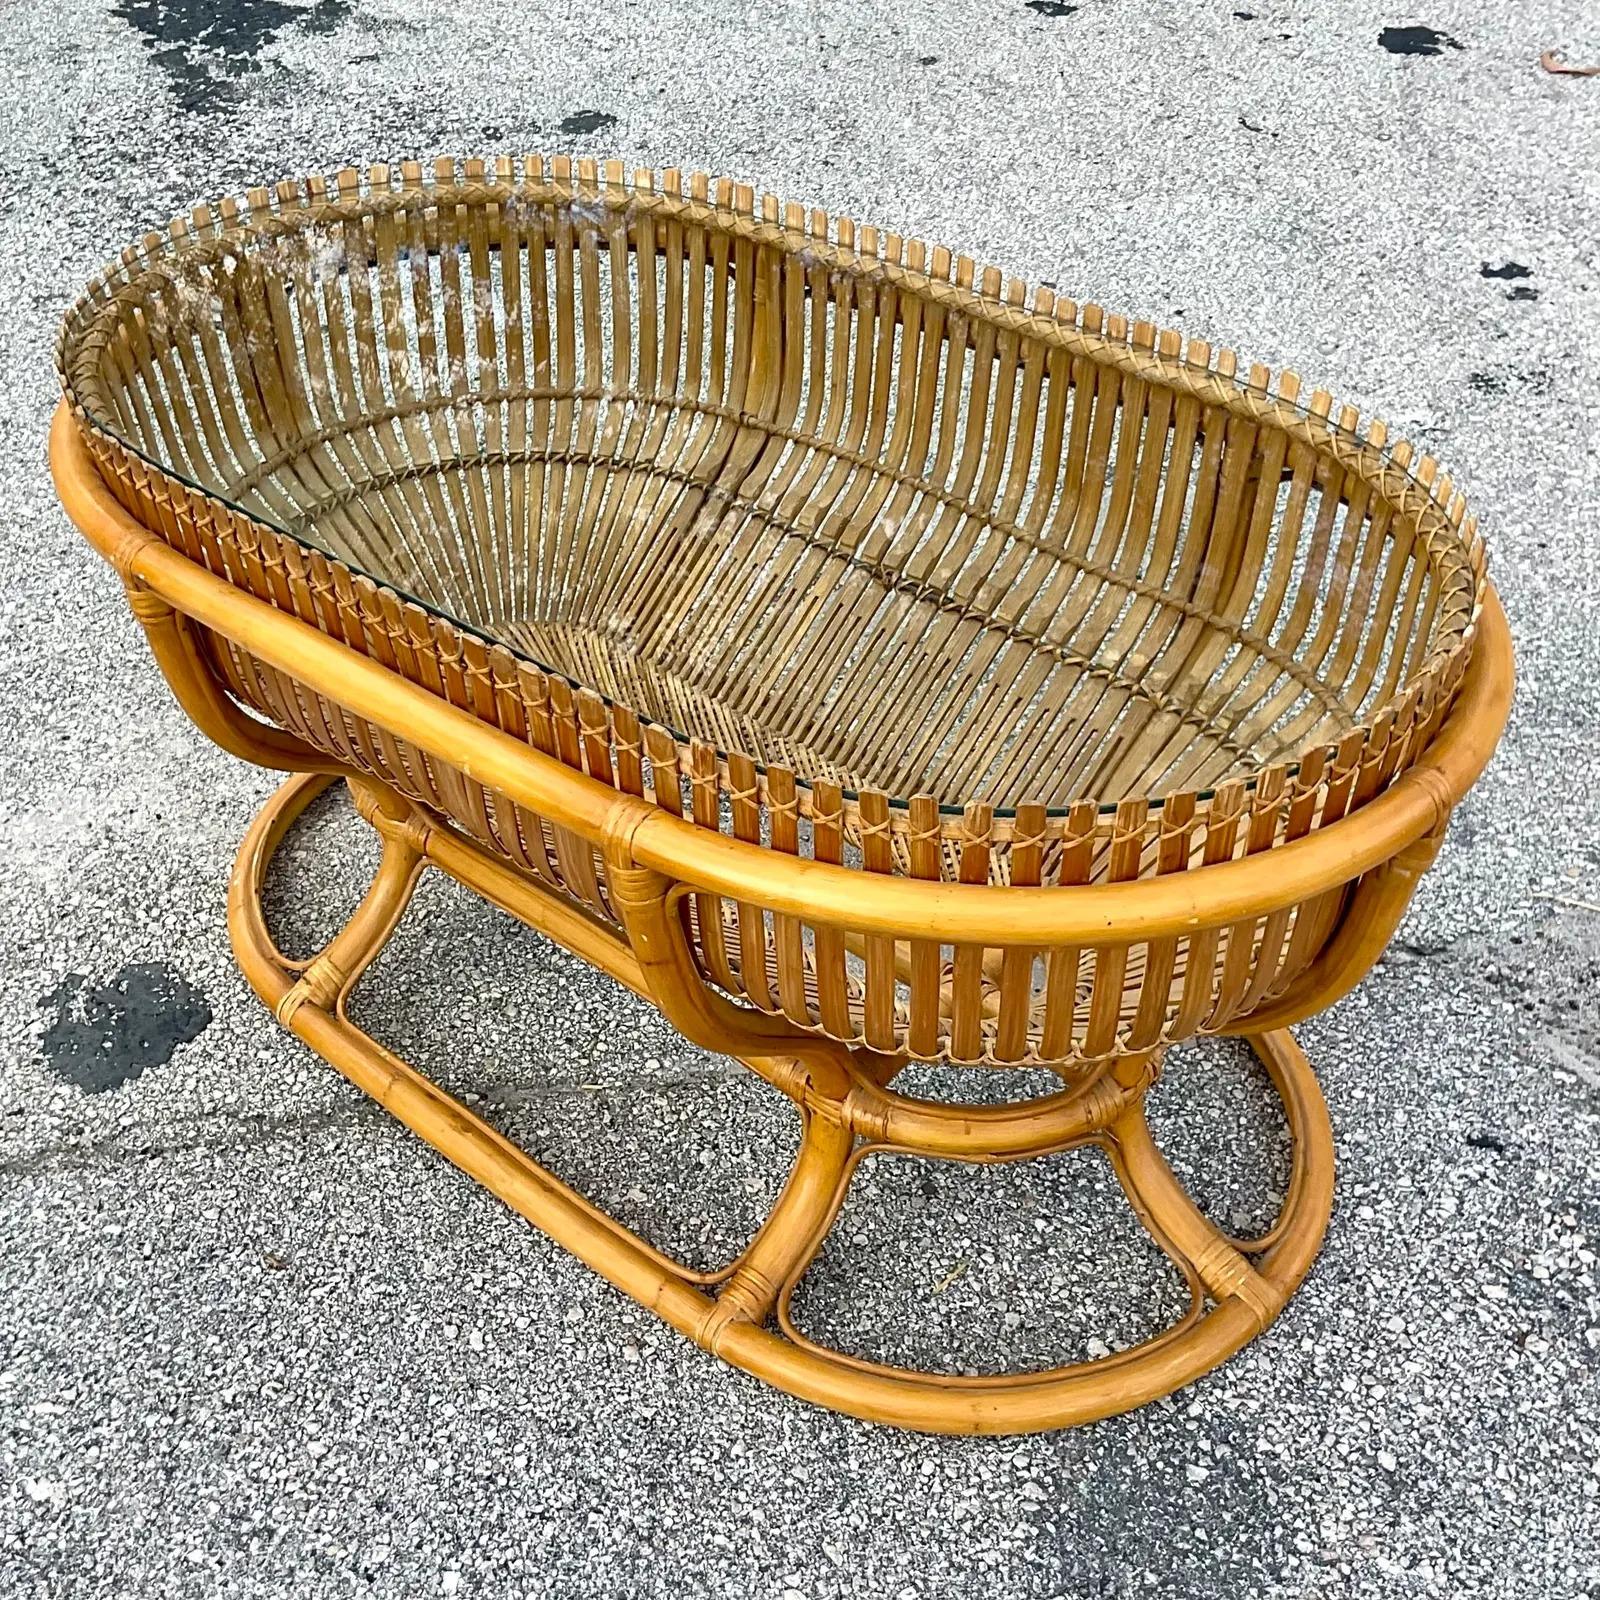 A fantastic vintage Coastal coffee table. Chic split rattan arranged in a slat design. Inset glass top. Acquired from a Palm Beach estate.